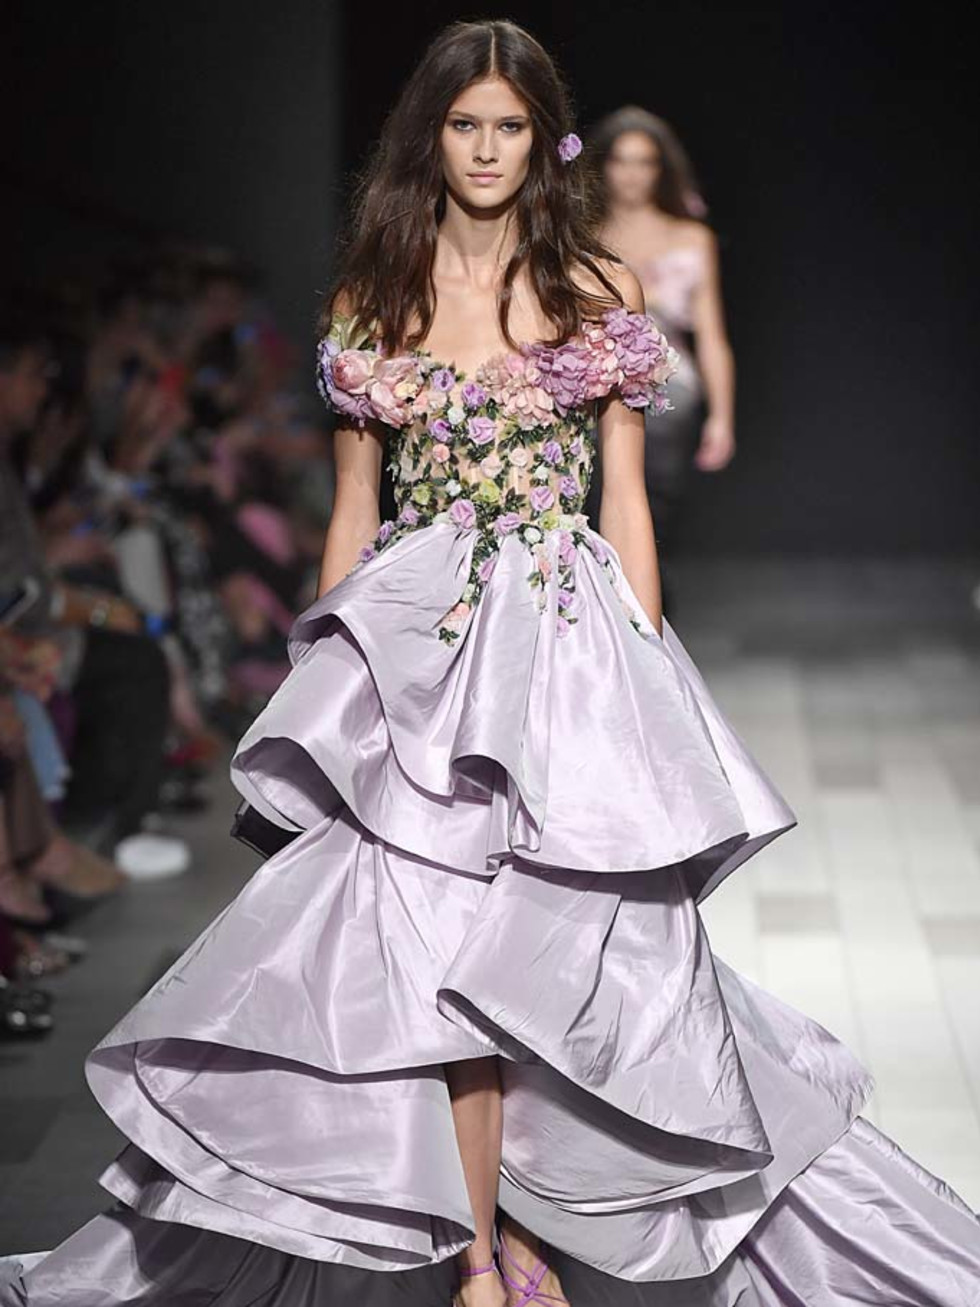 Marchesa duo go all out to create attention-getting evening gowns ...